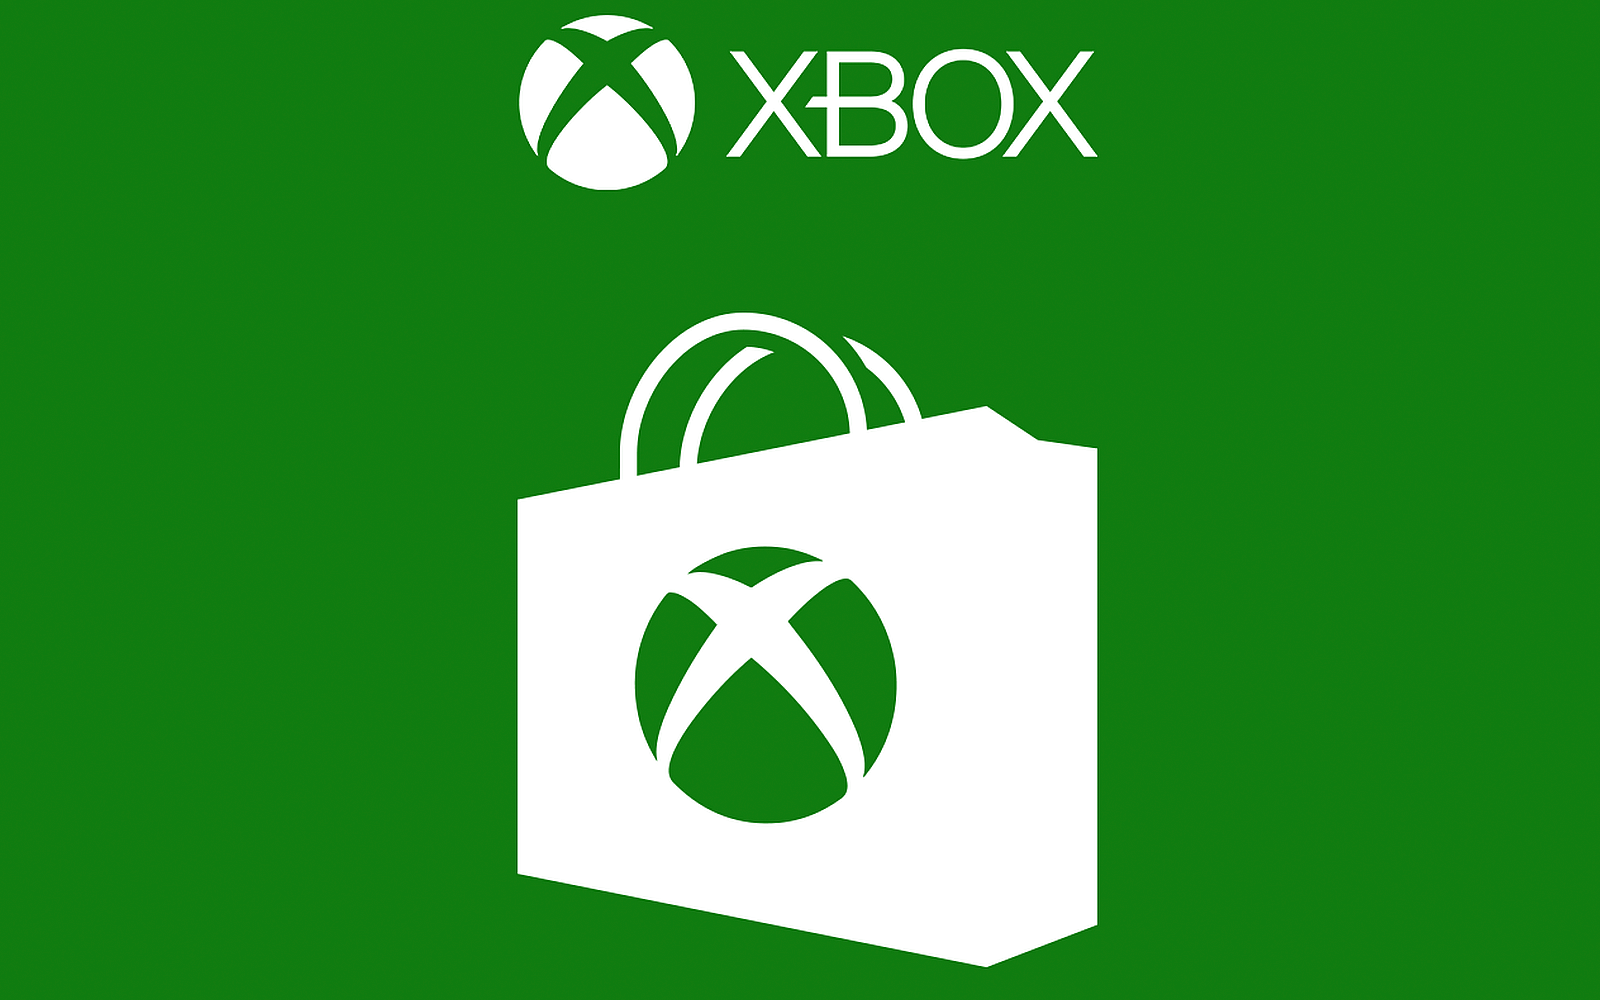 New games coming to the Microsoft Store!  Xbox will see some interesting firsts